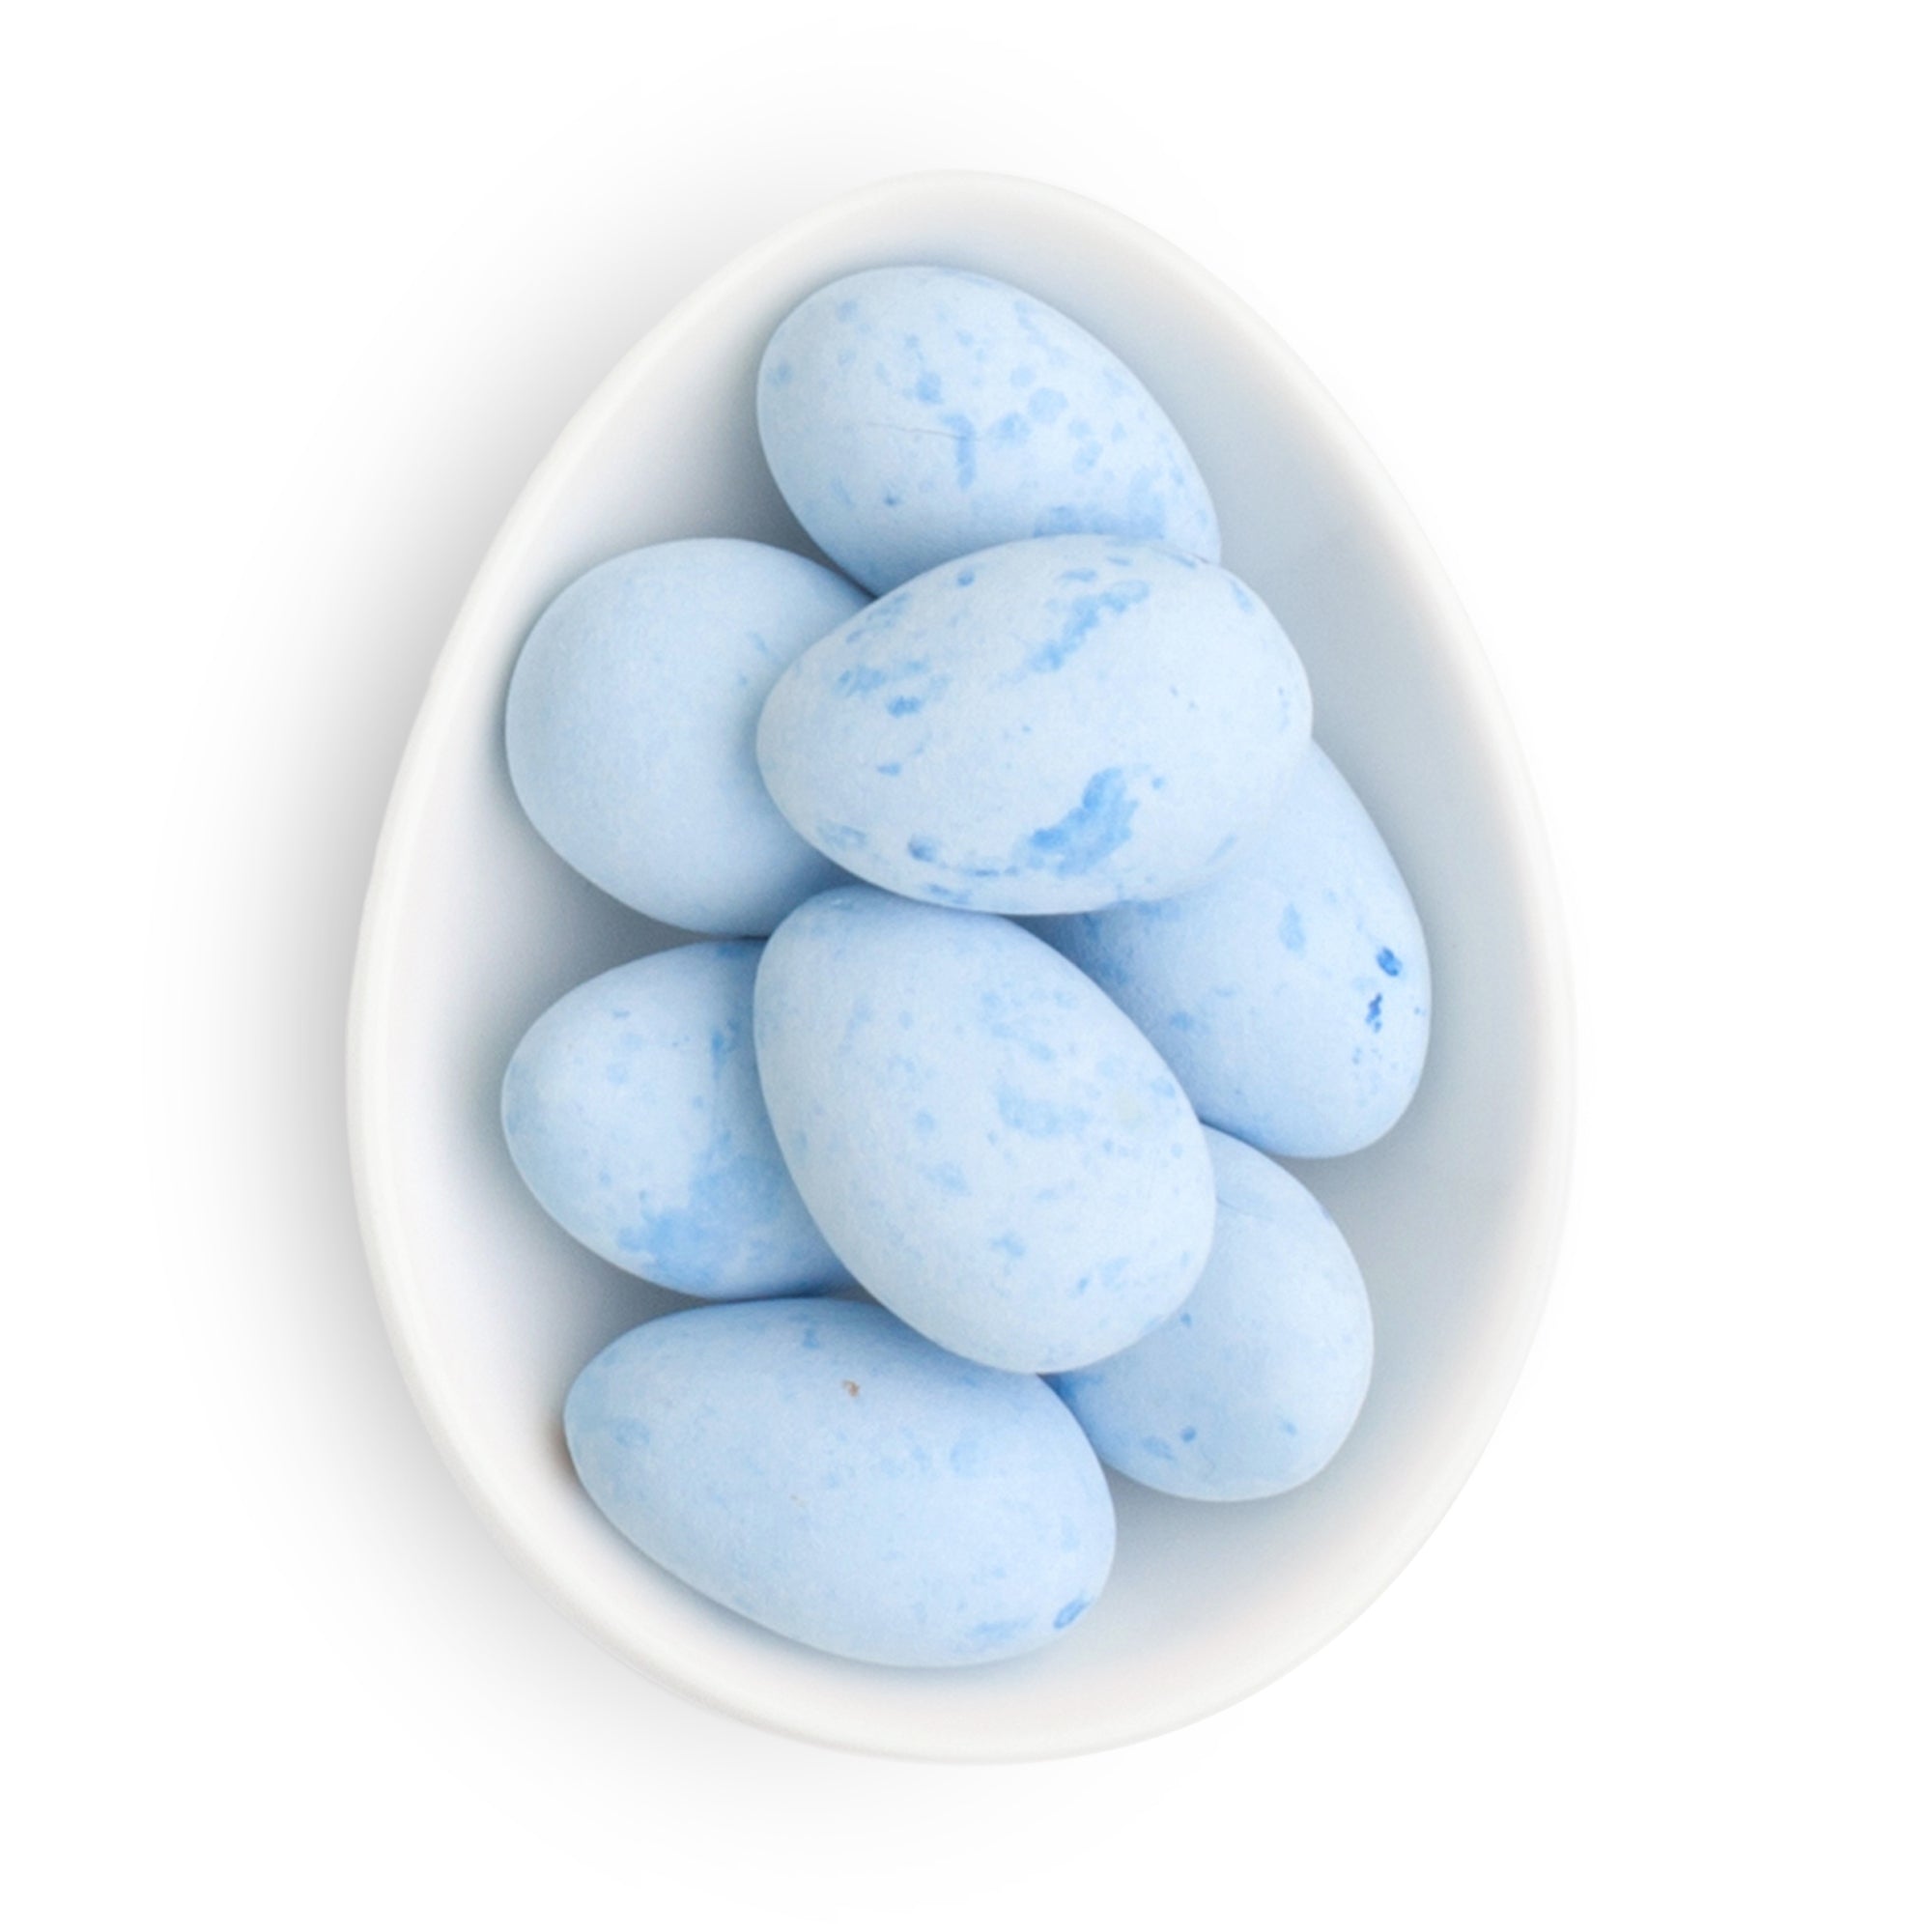 Small dish full of blue egg-shaped candies.